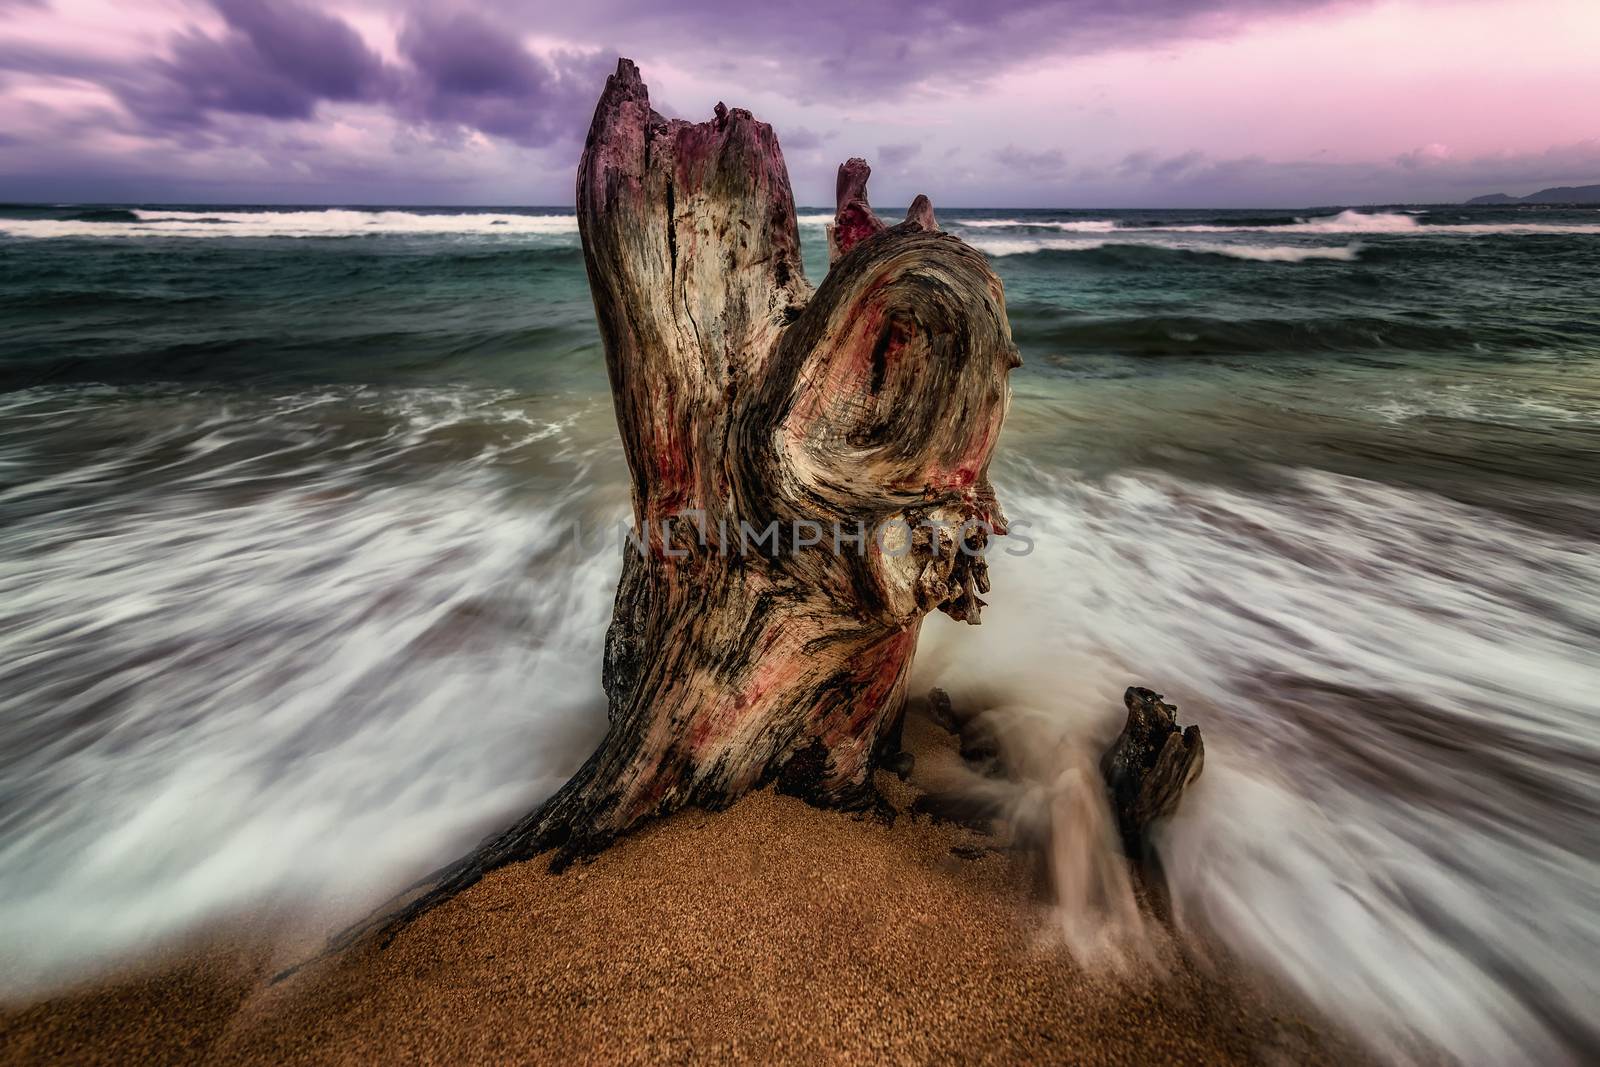 Battered Tree Stump in the Surf by backyard_photography